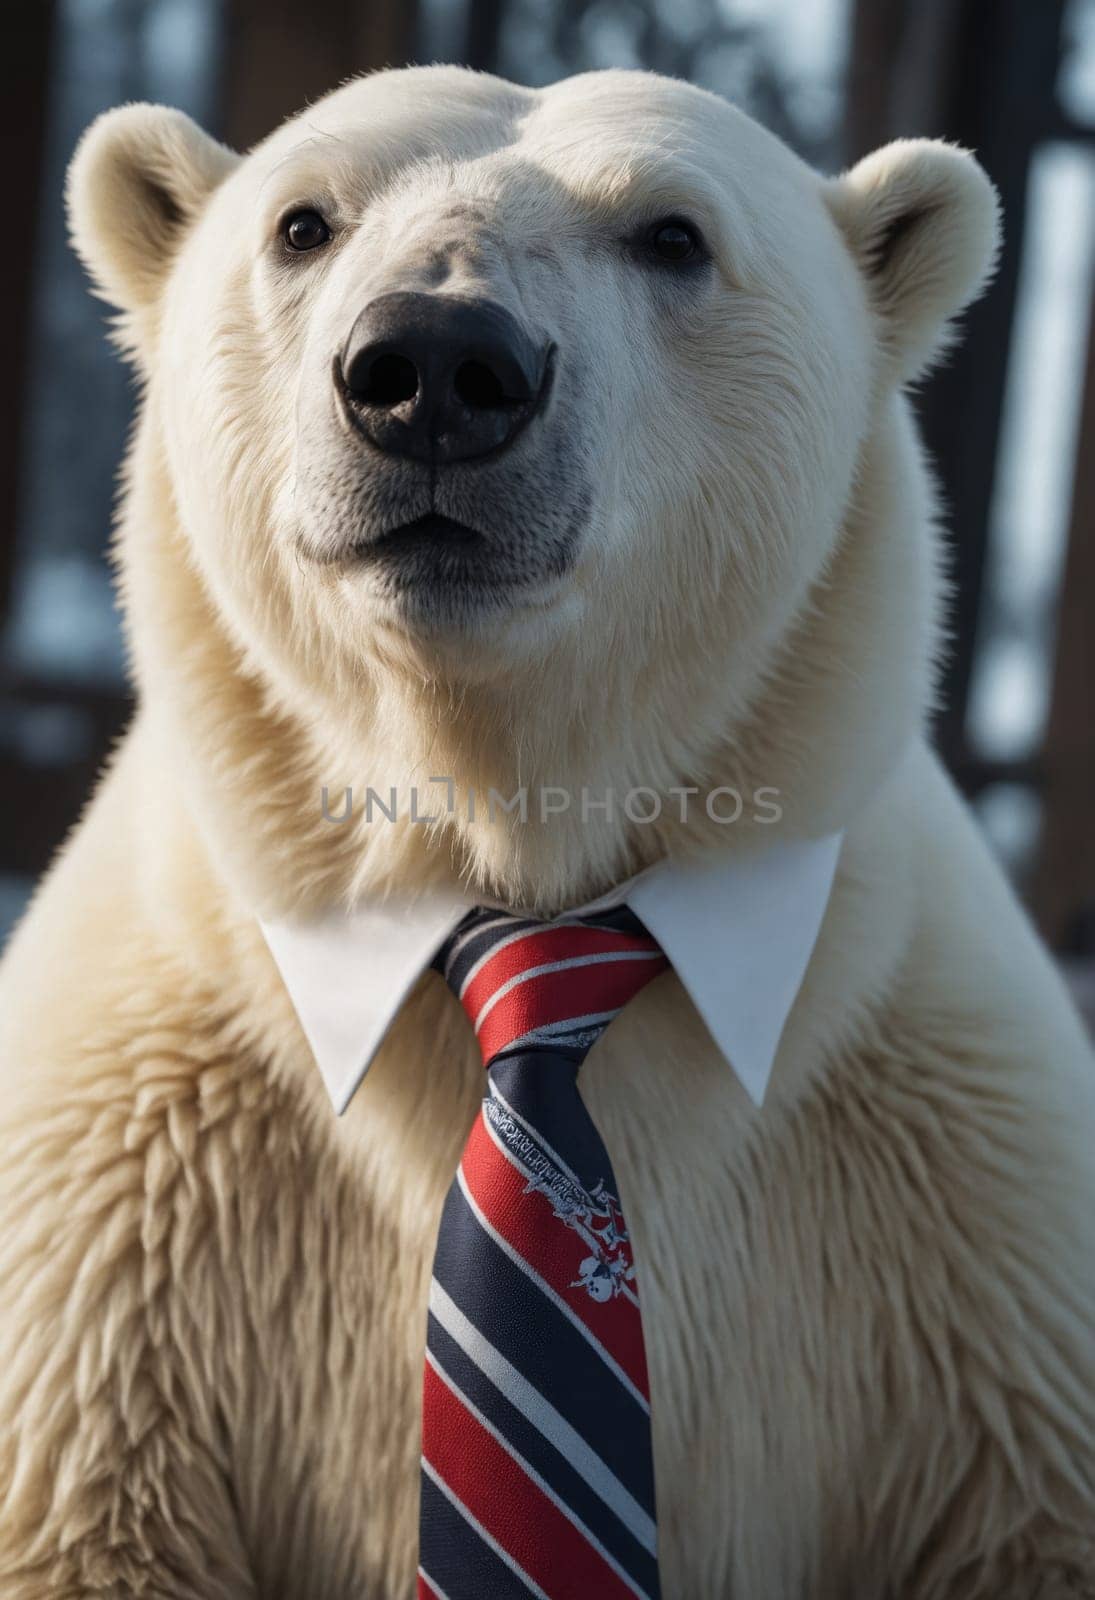 Much more than your average sight! Witness the delicate humor in this inventive image: a polar bear cleverly juxtaposed with the refinement of a formal shirt and a colorful tie